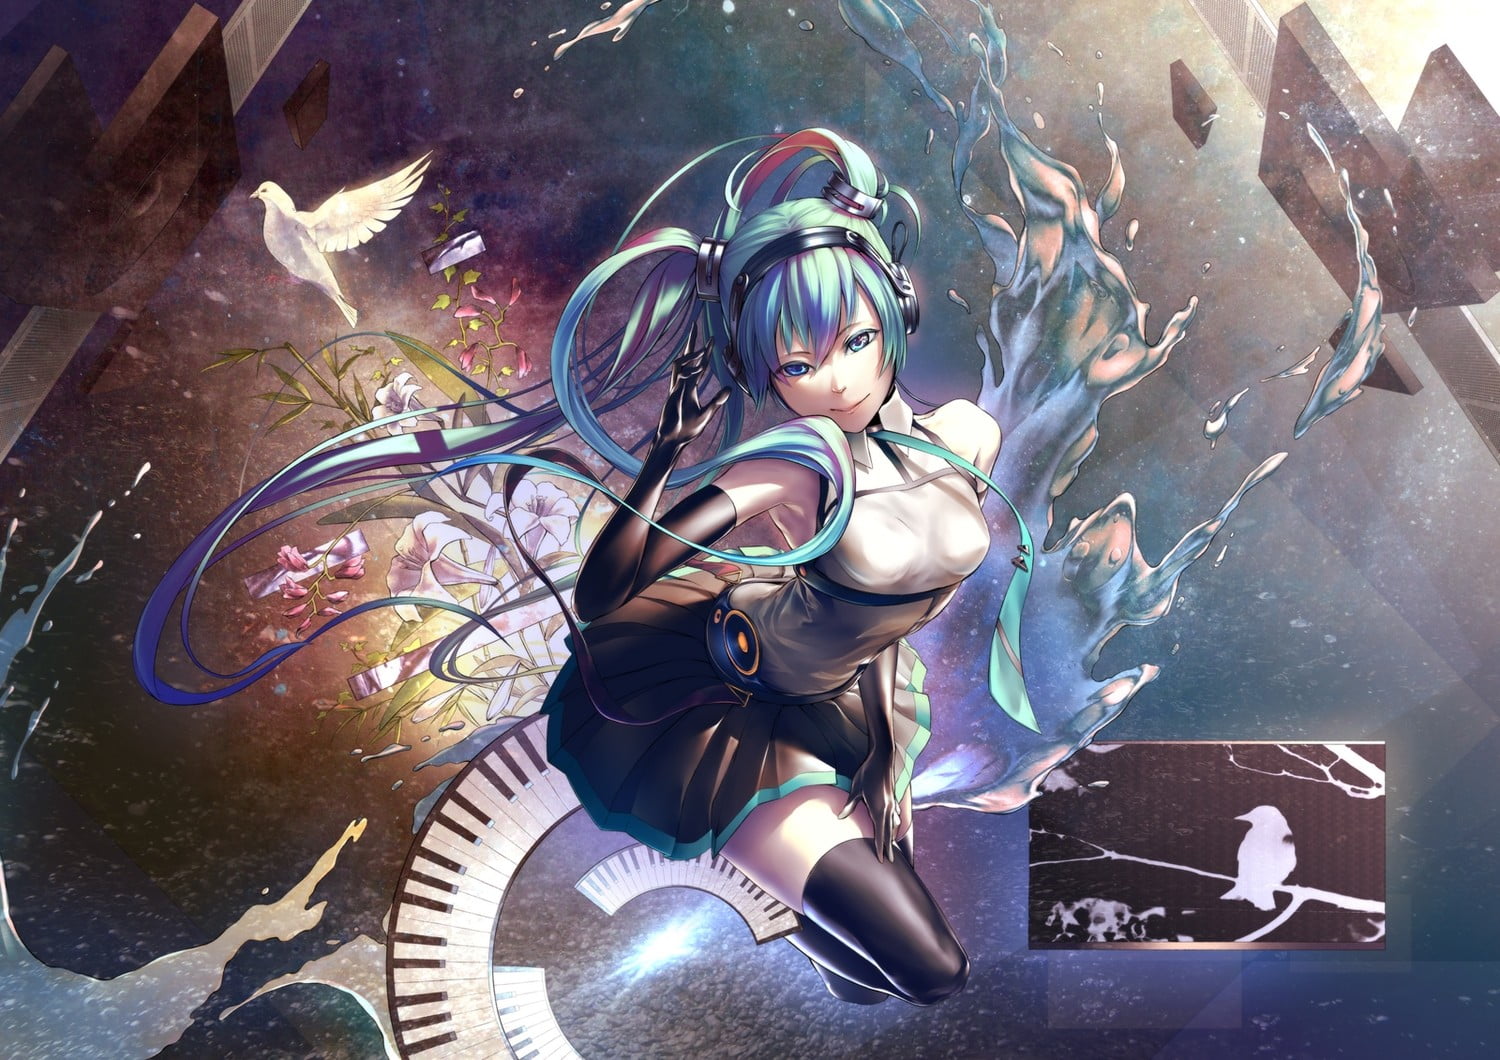 blue-haired female anime character illustration, Hatsune Miku, Vocaloid